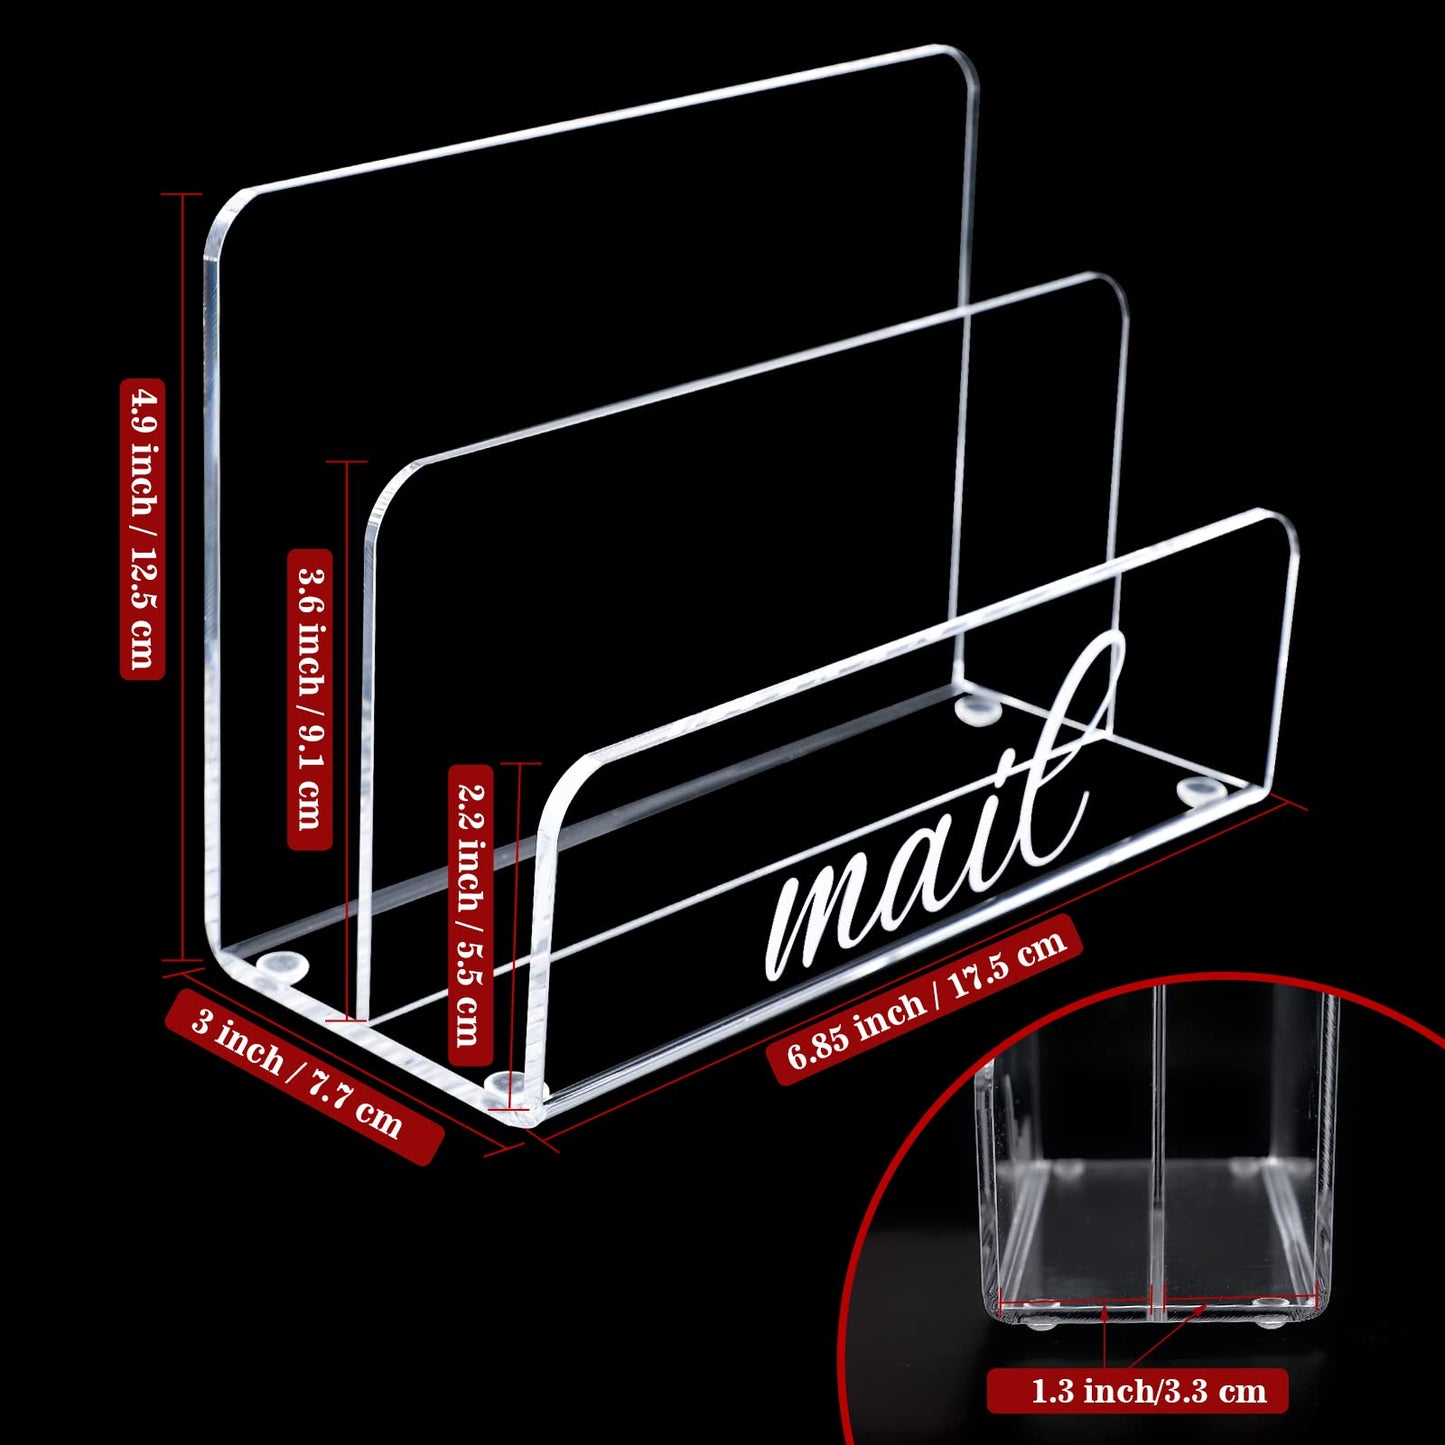 Kamehame Mail Organizer 2 Sections Clear Acrylic Mail Holder Vertical Countertop Mail Sorter with White Mail Script Front Panel Letter Holder for Desk Envelope Holder for Home Office School